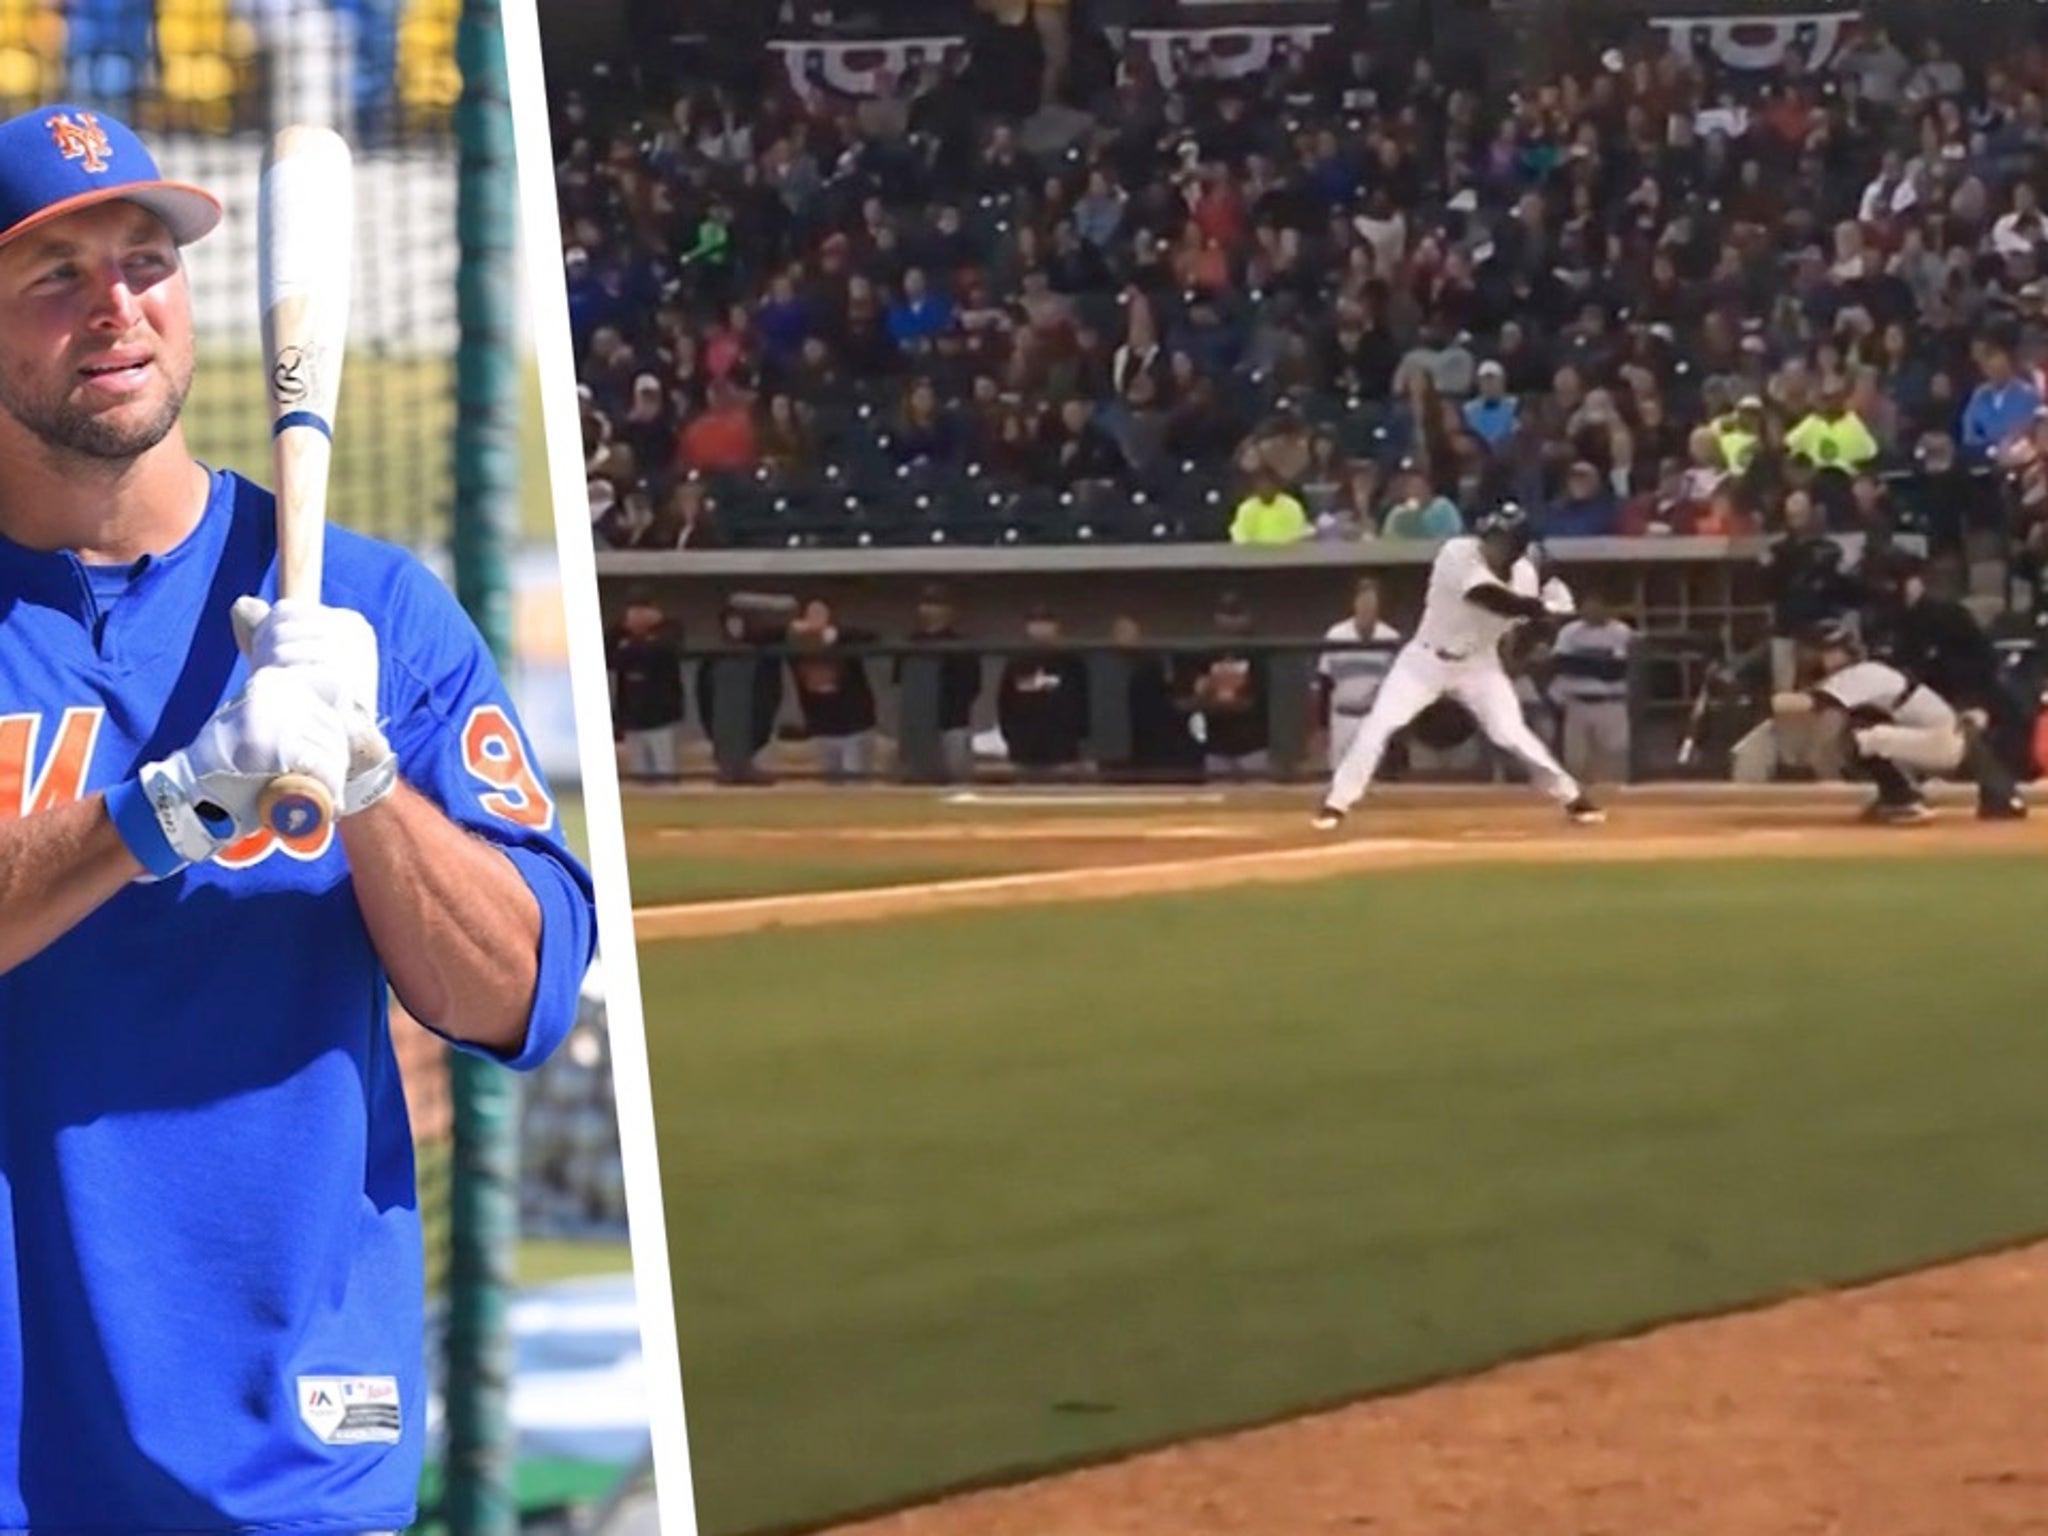 It finally happened: Tim Tebow hits his first spring training home run